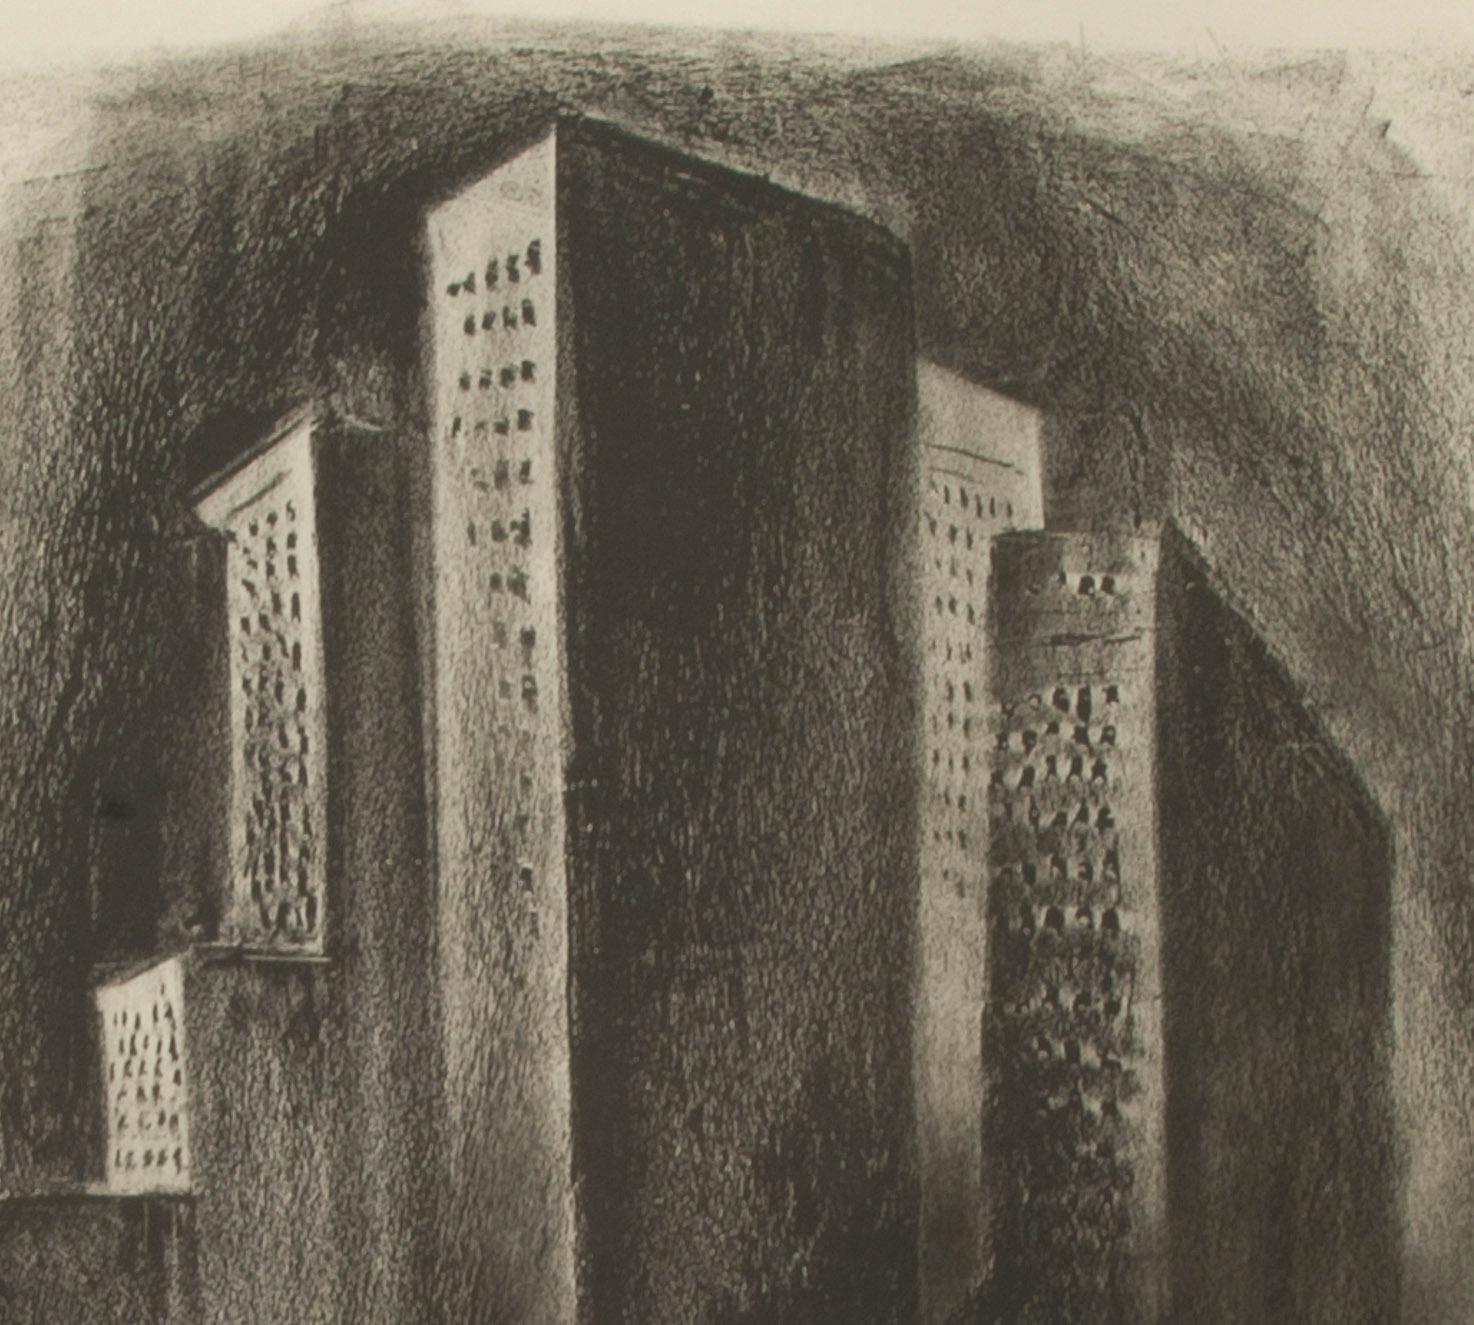 New York Night\Lithograph, 1930
Edition: 30
Printer: Meister Schulz, Berlin
Printed on heavy wove paper without watermark
This lithograph was created in Berlin from Dehn's vivid memories of the Metropolis. This image depicts the monumental scale of